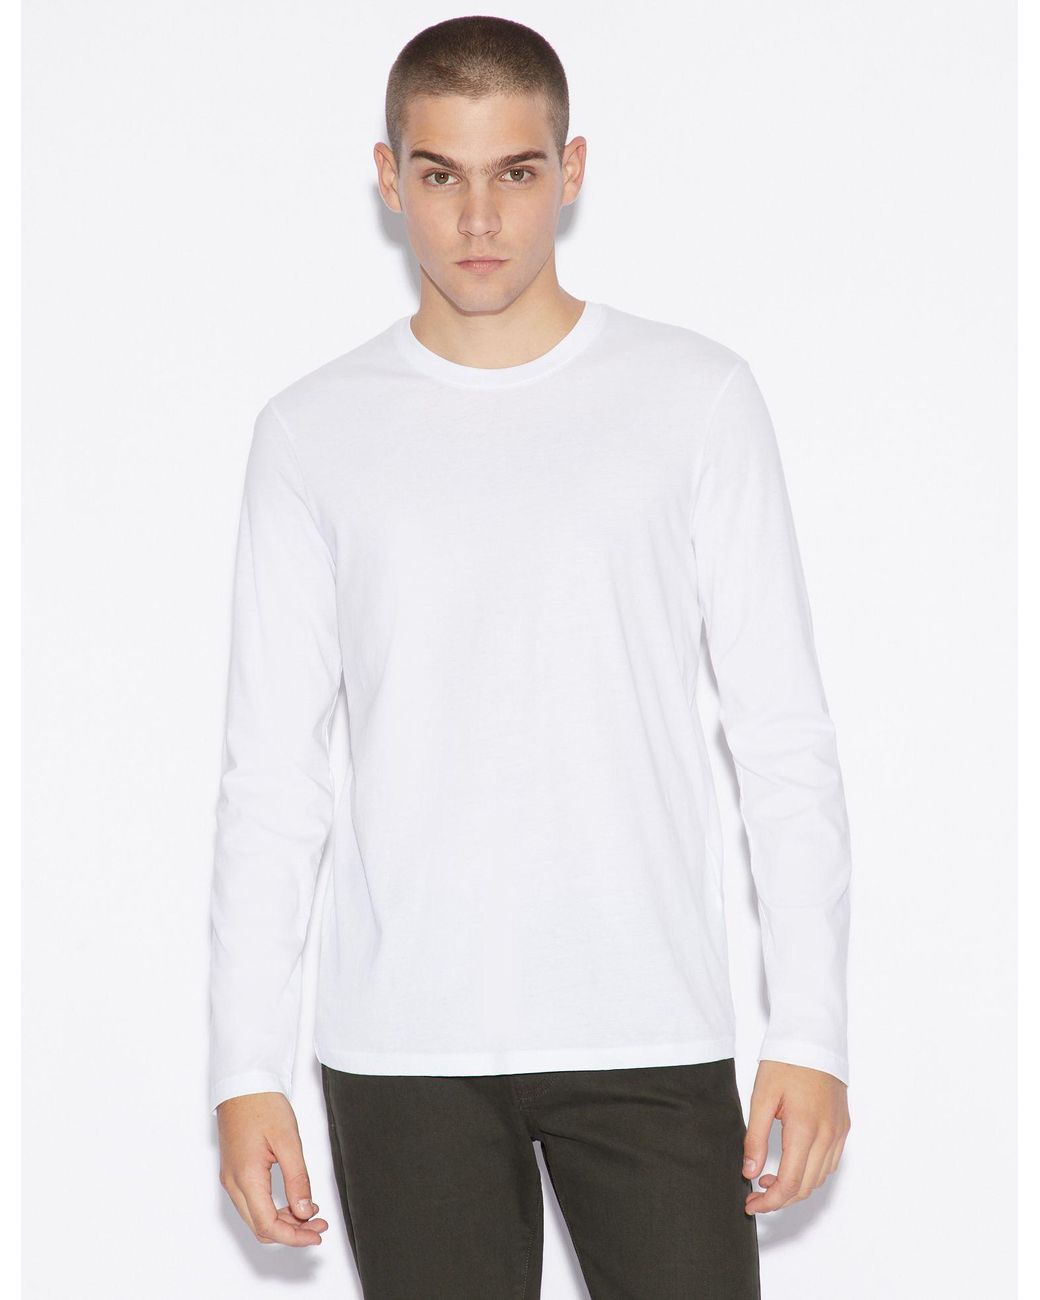 Armani Exchange Long-sleeve Pima Cotton Tee in White for Men - Lyst